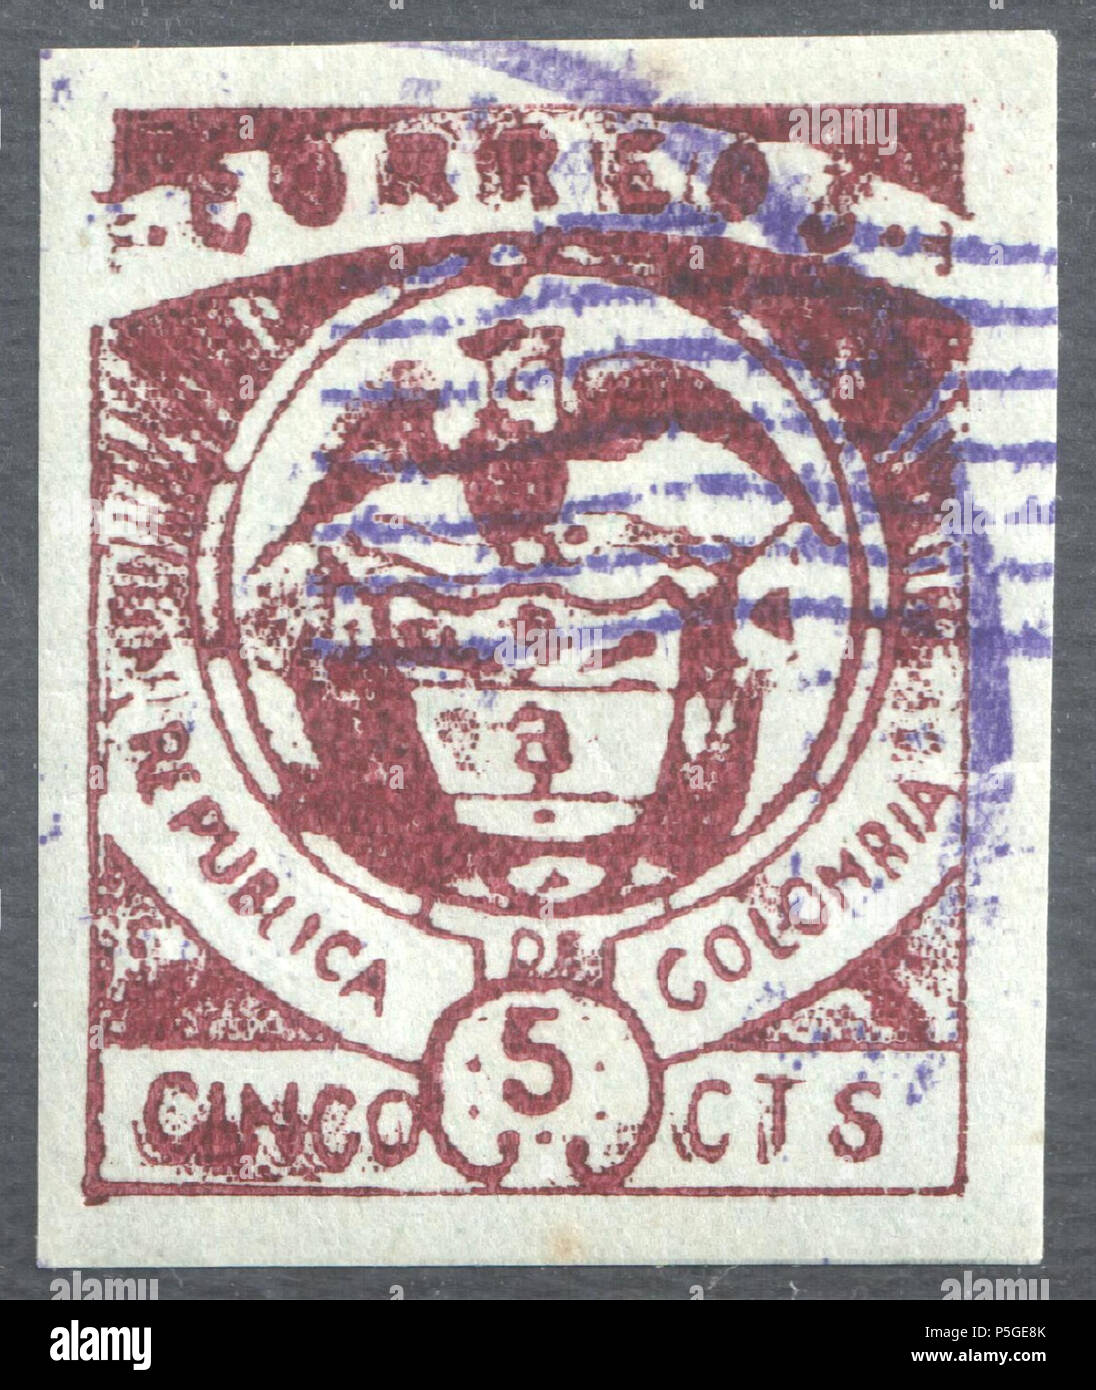 N/A. English: Colombia Cartagena 5c second issue, purple overprint, December 8 1899. Overprinted with 7 parallel wavy lines, a control mark to identify stamps as national provisional issue. Catalogue: Sc. 172 . 8 December 1899. Post of Colombia 368 Colombia Cartagena 1899 Sc172 Stock Photo